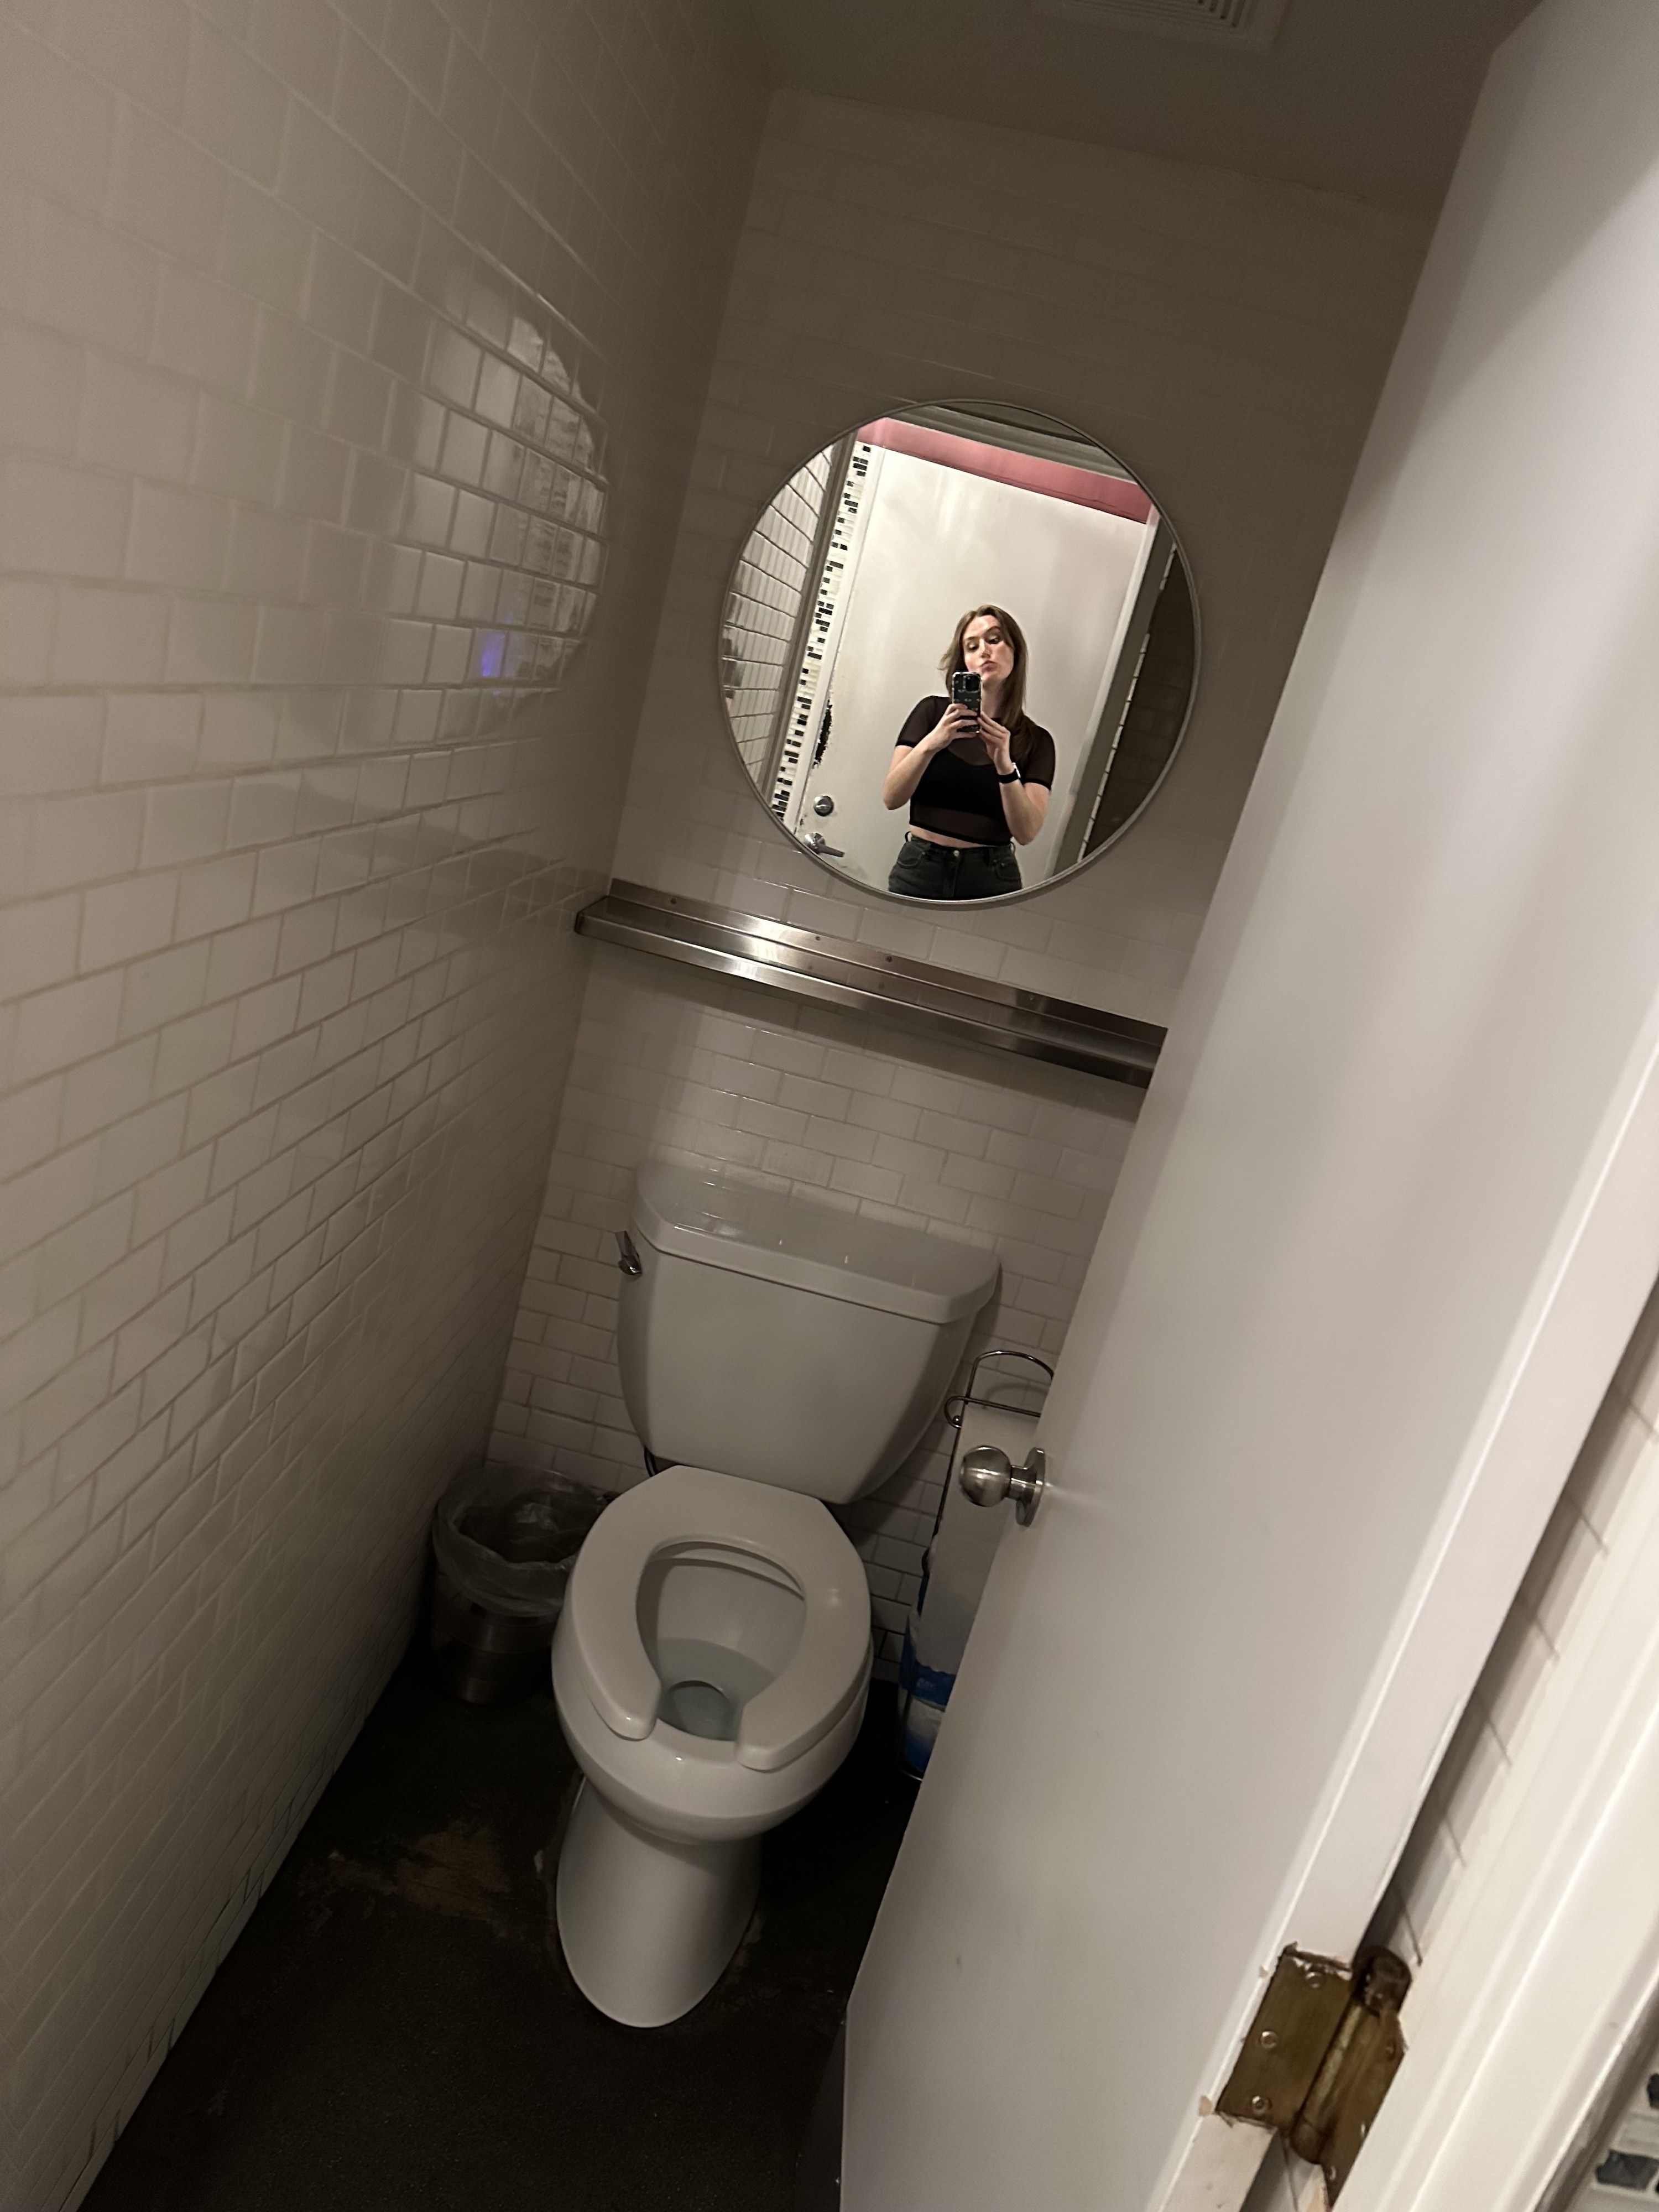 A photo of the inside of the bathroom